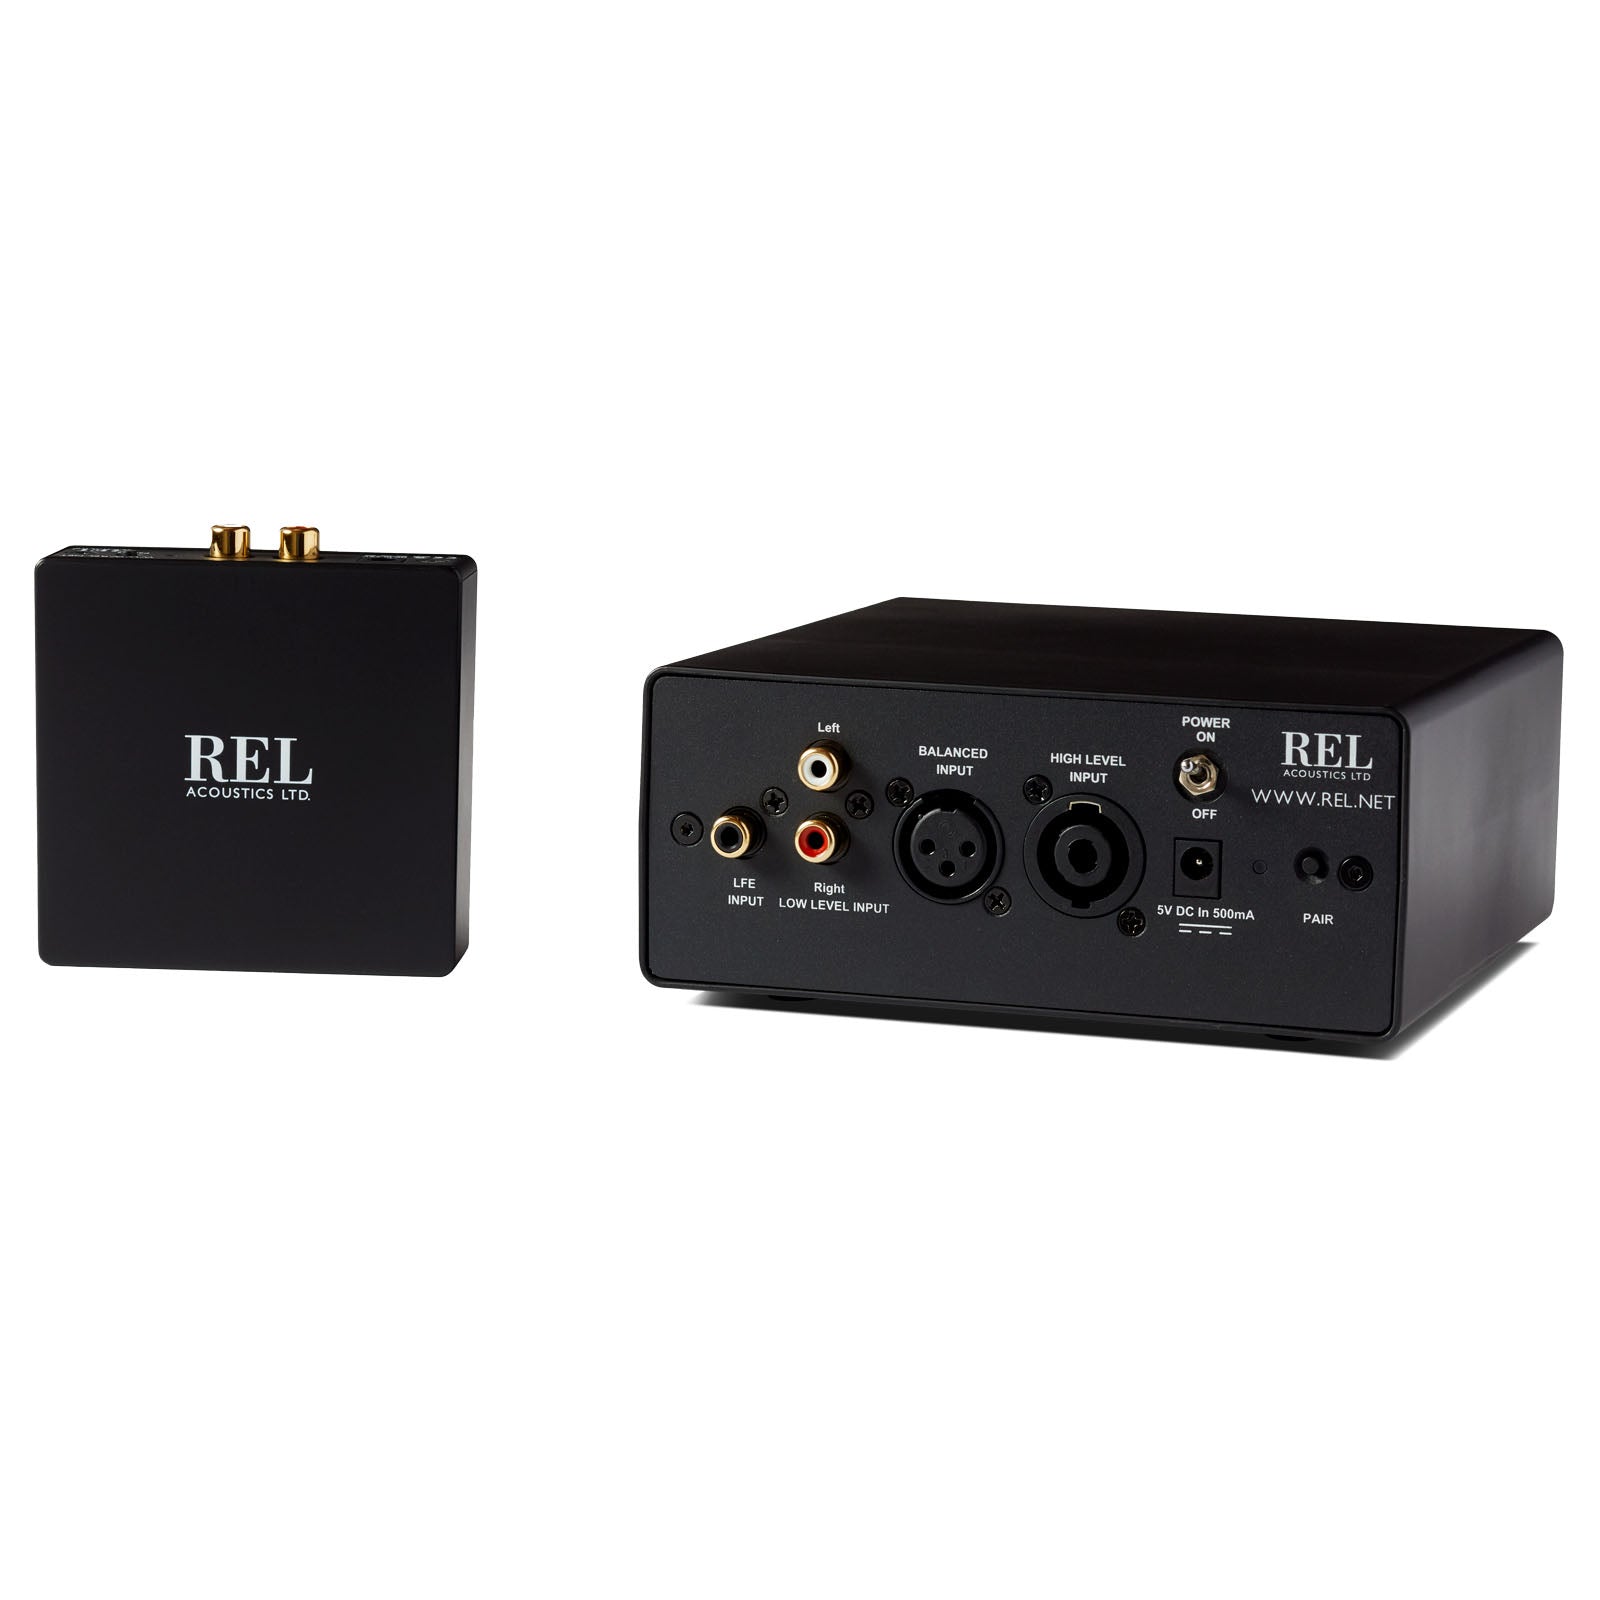 REL Acoustics AirShip Transmitter Designed for 212/SX, Carbon Special, S/510 and S/812. Compatible with G1 MK II